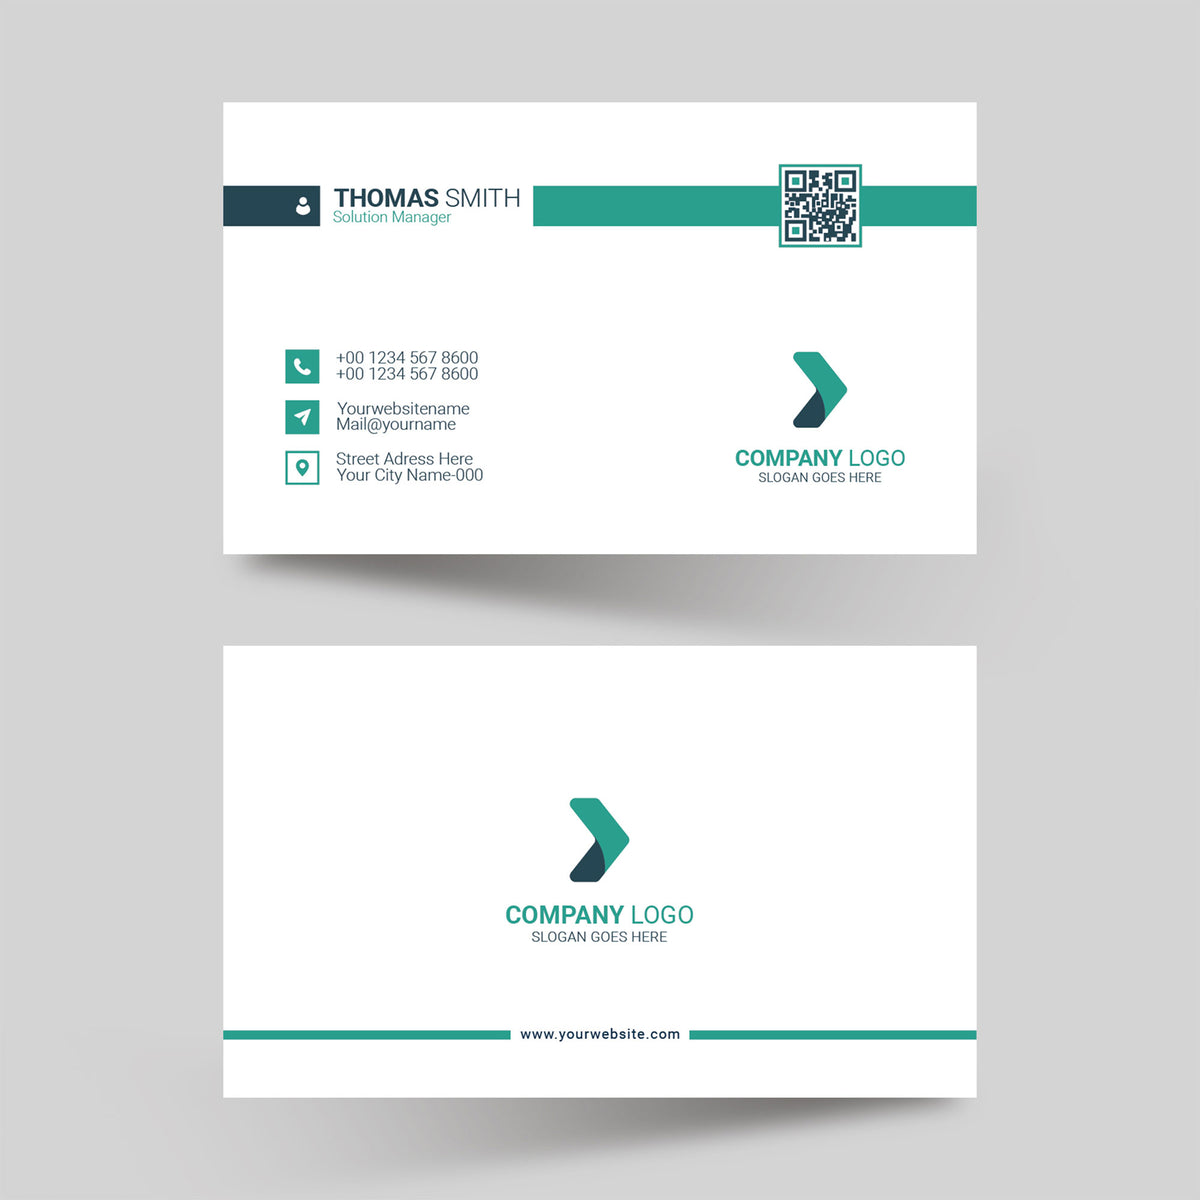 Plantable Professional Green & White Business Cards - 250 Cards